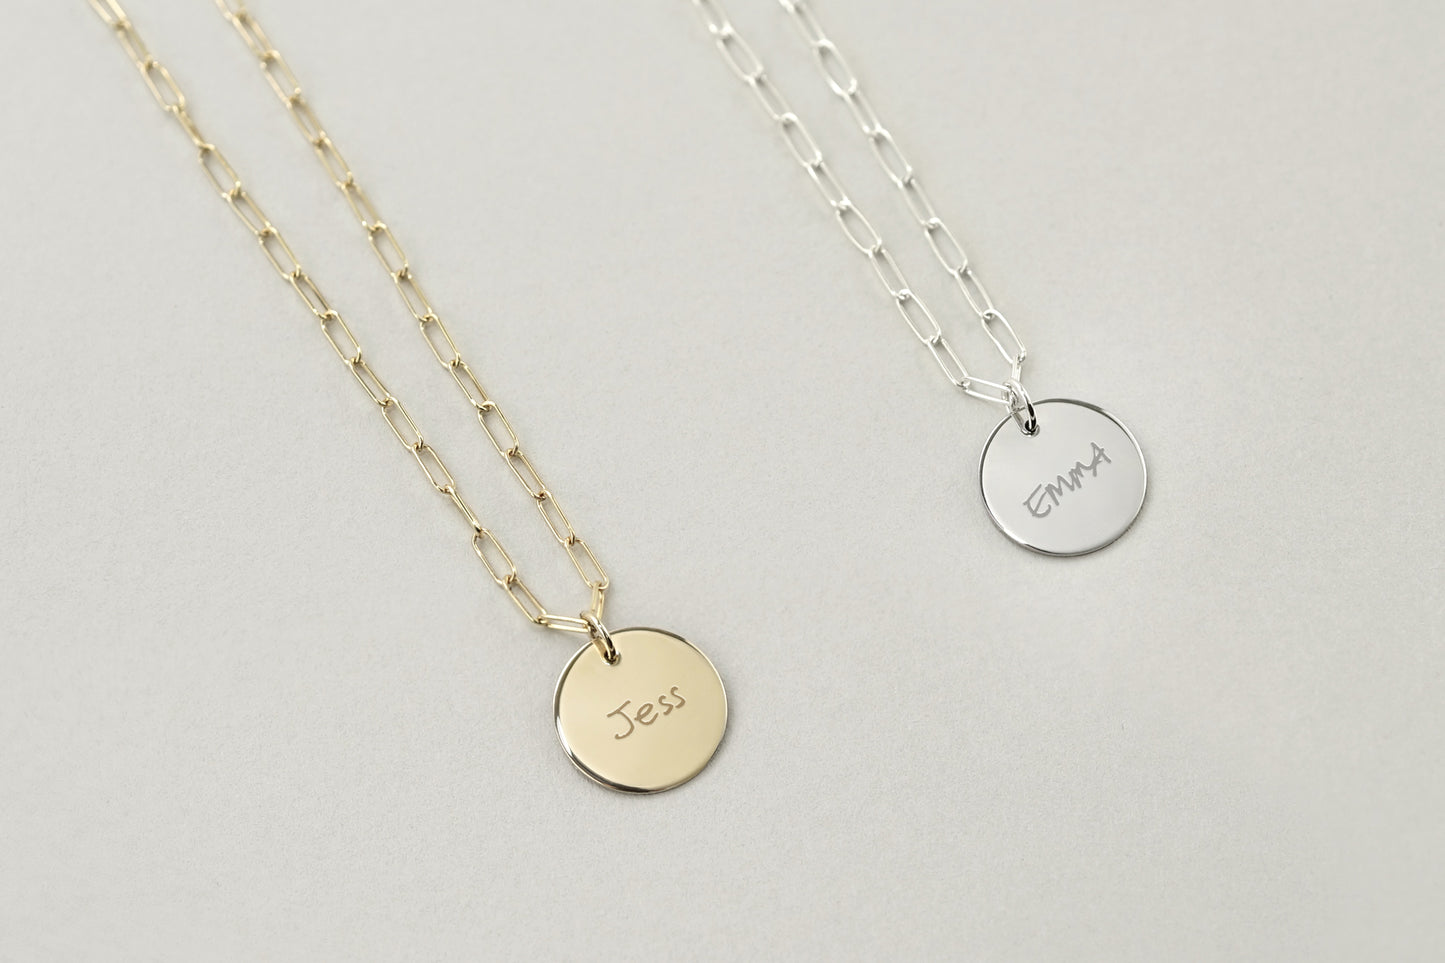 Luna Handwriting Small Disk Necklace